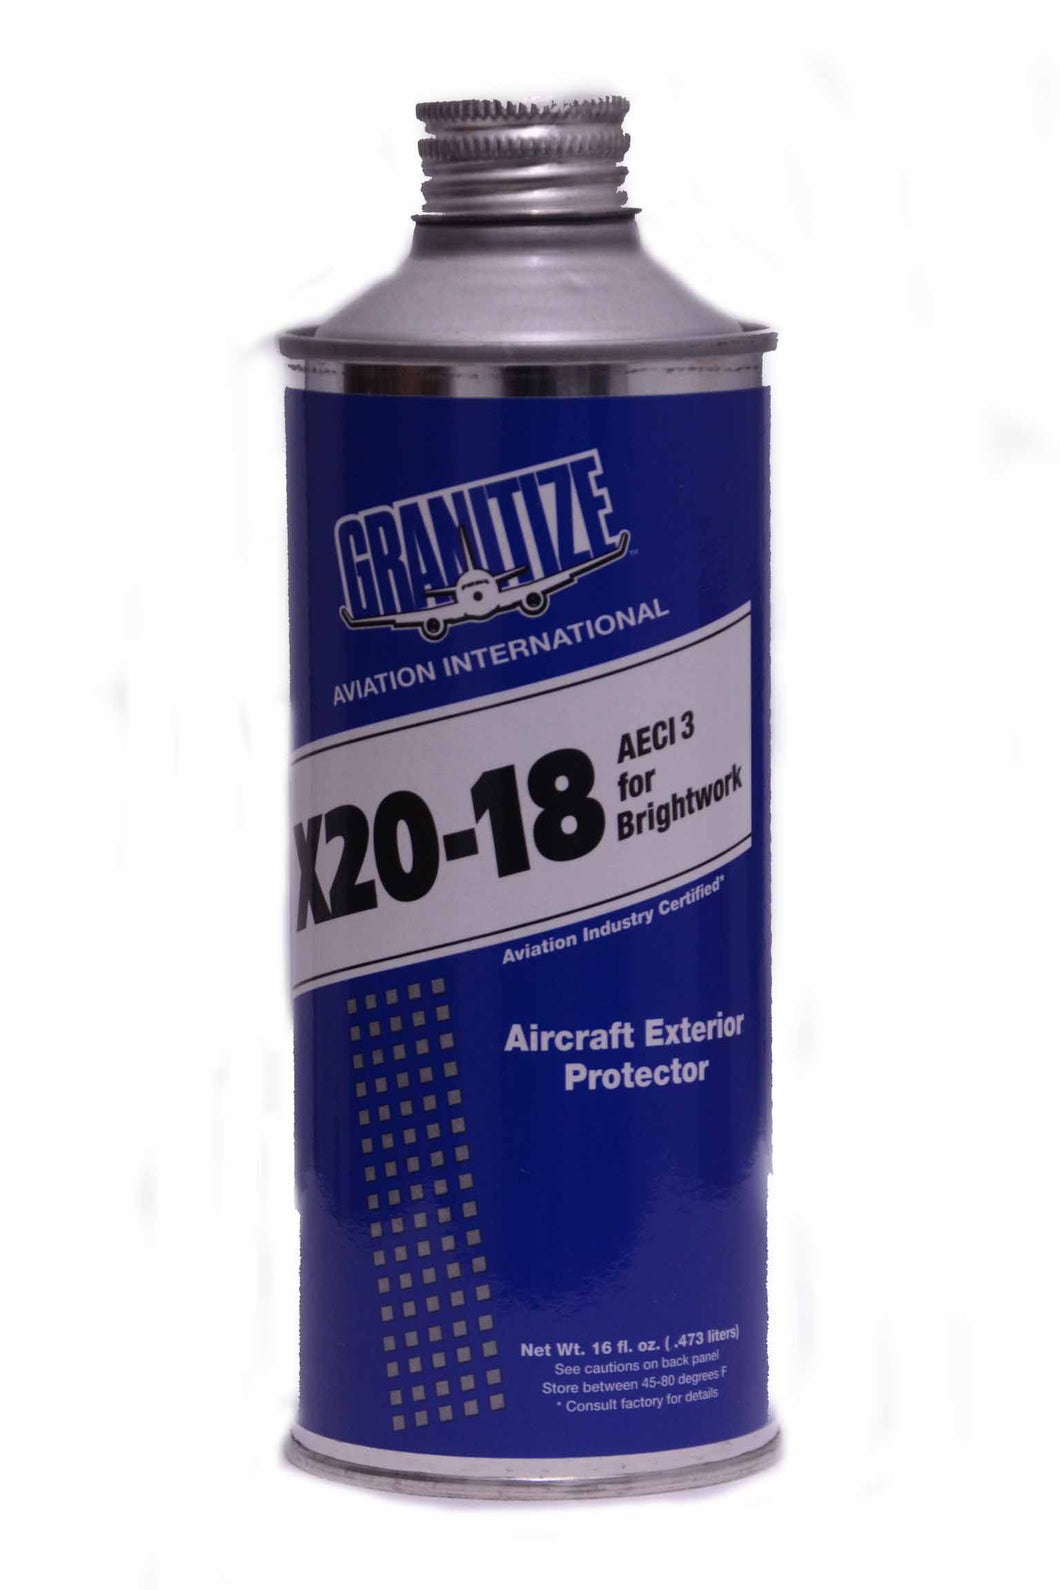 GRANITIZE X20-18 AECI 3 Pint Bottle - for Brightwork